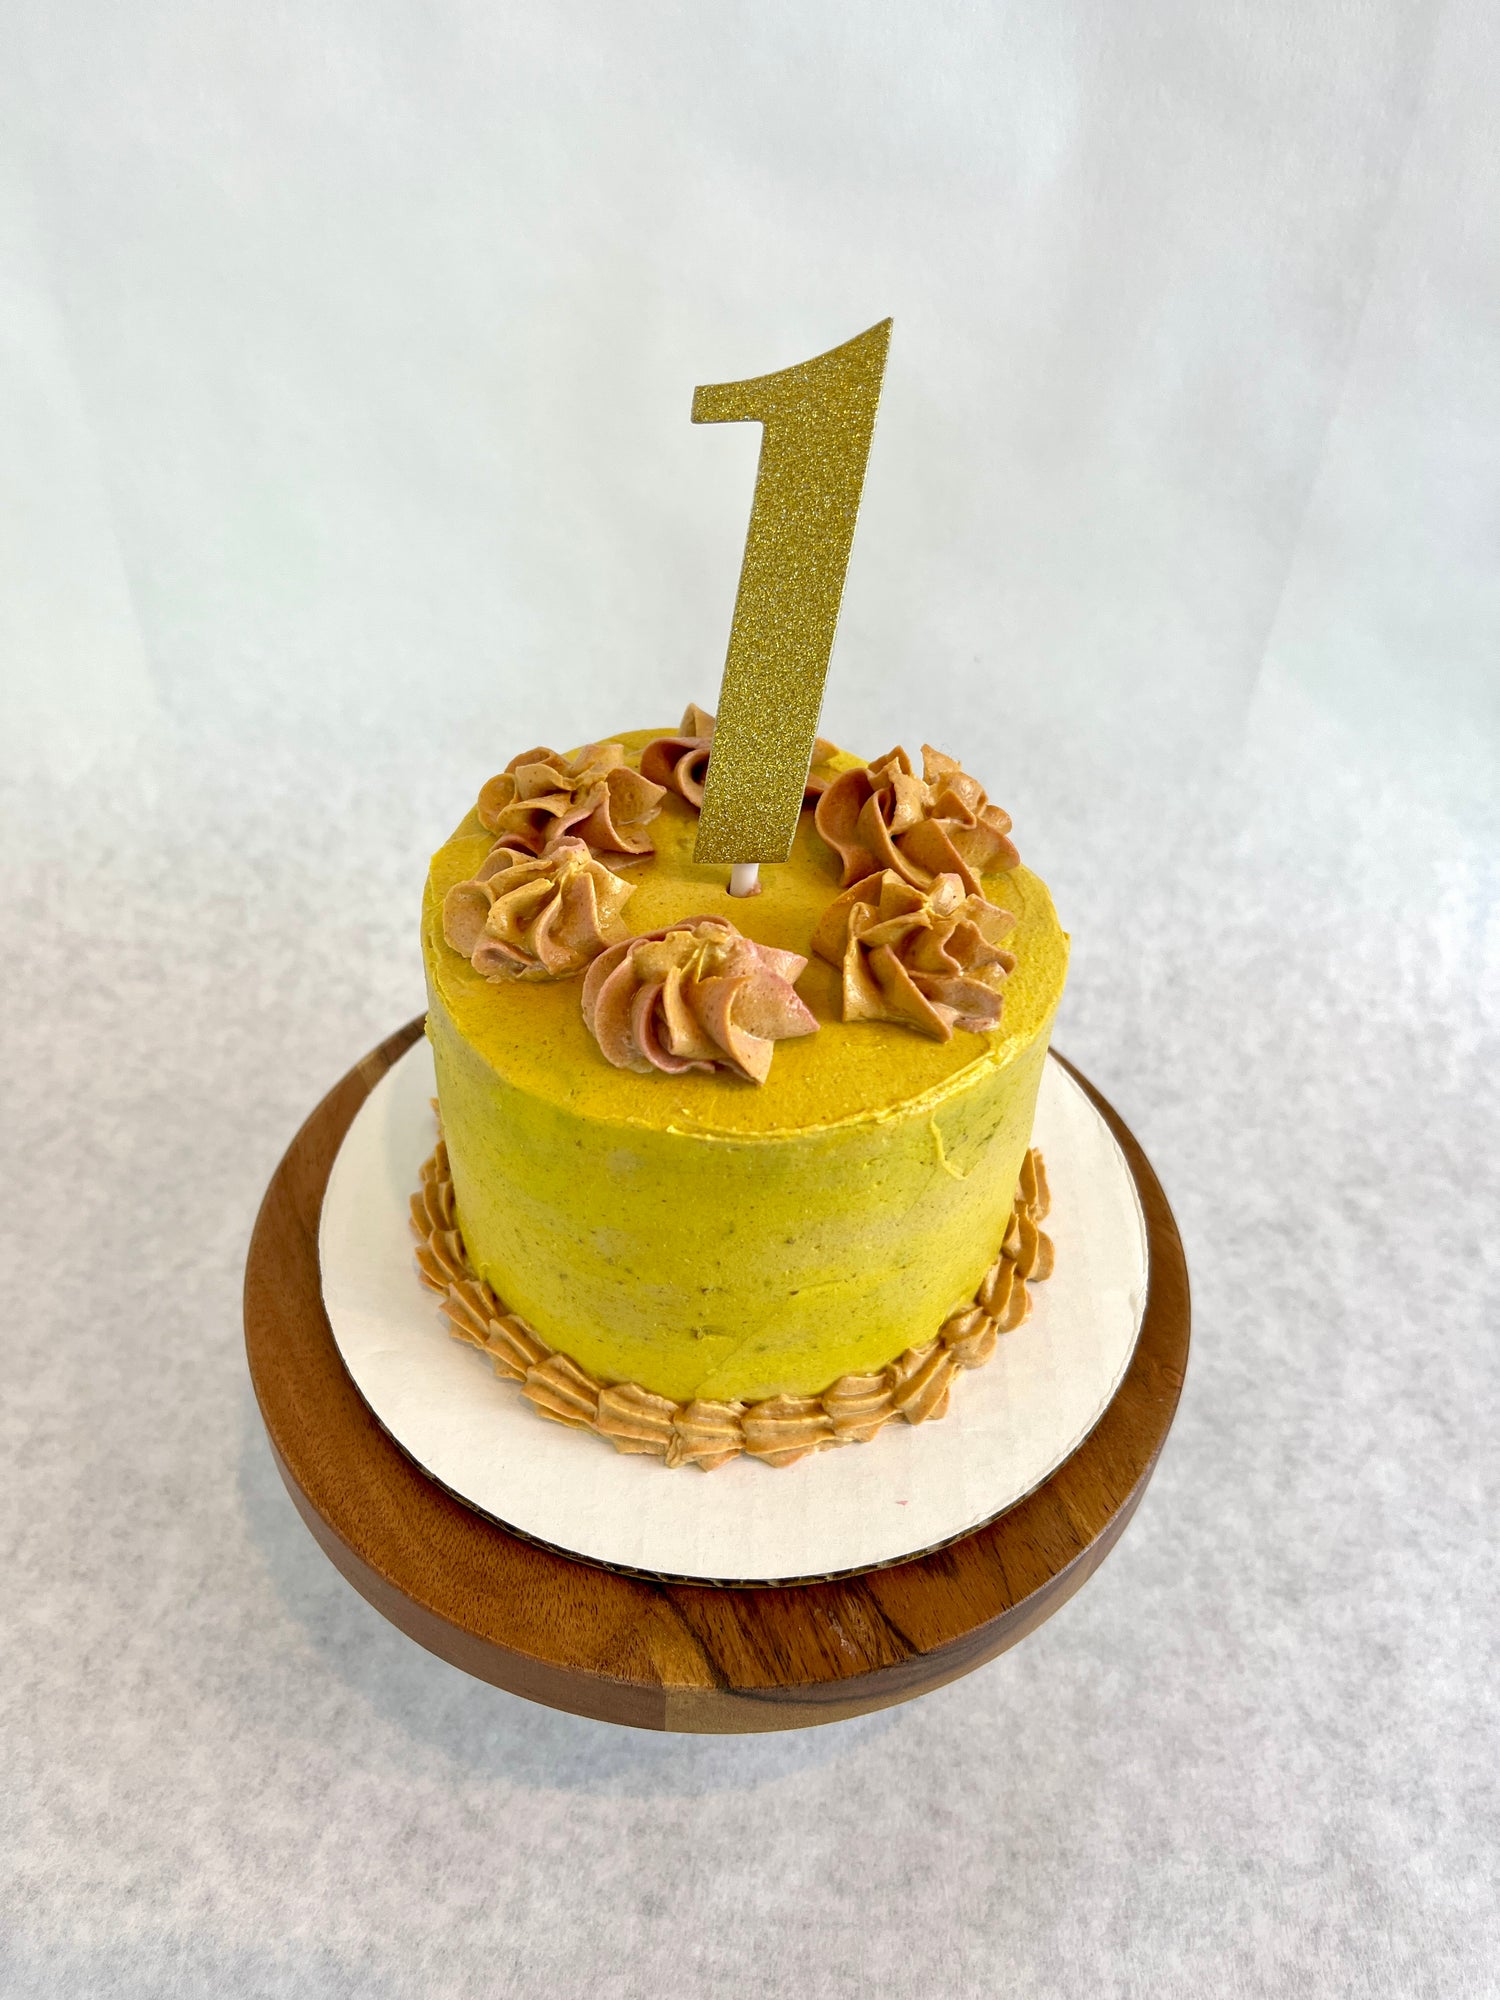 Custom dog birthday cake with yellow and orange icing. Includes gold glitter number one cake topper.